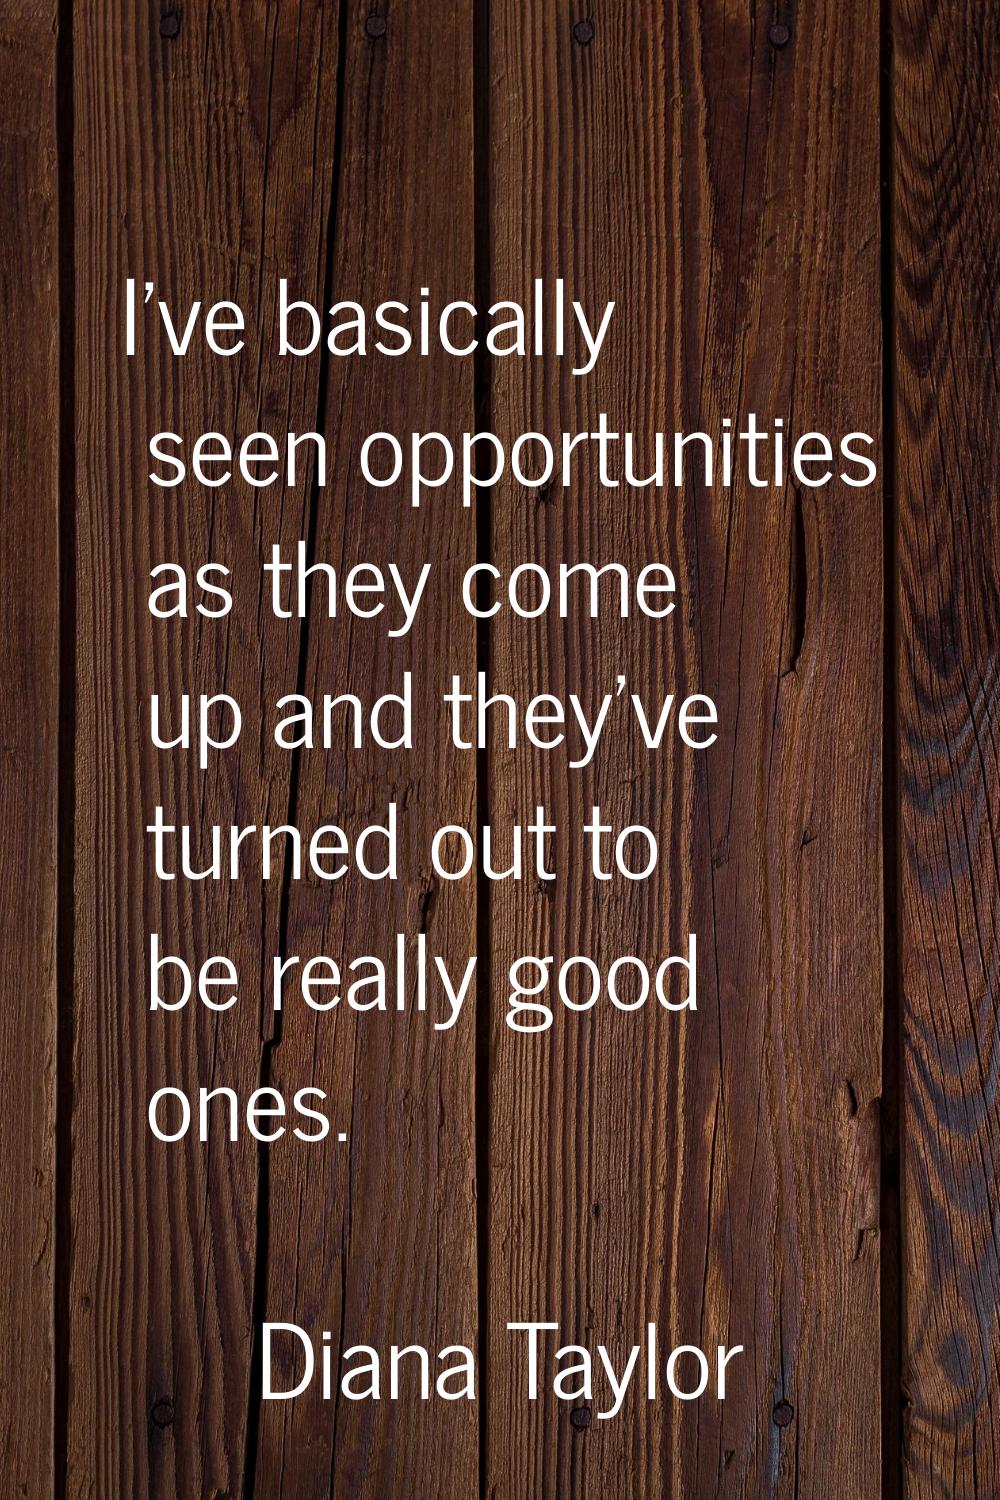 I've basically seen opportunities as they come up and they've turned out to be really good ones.